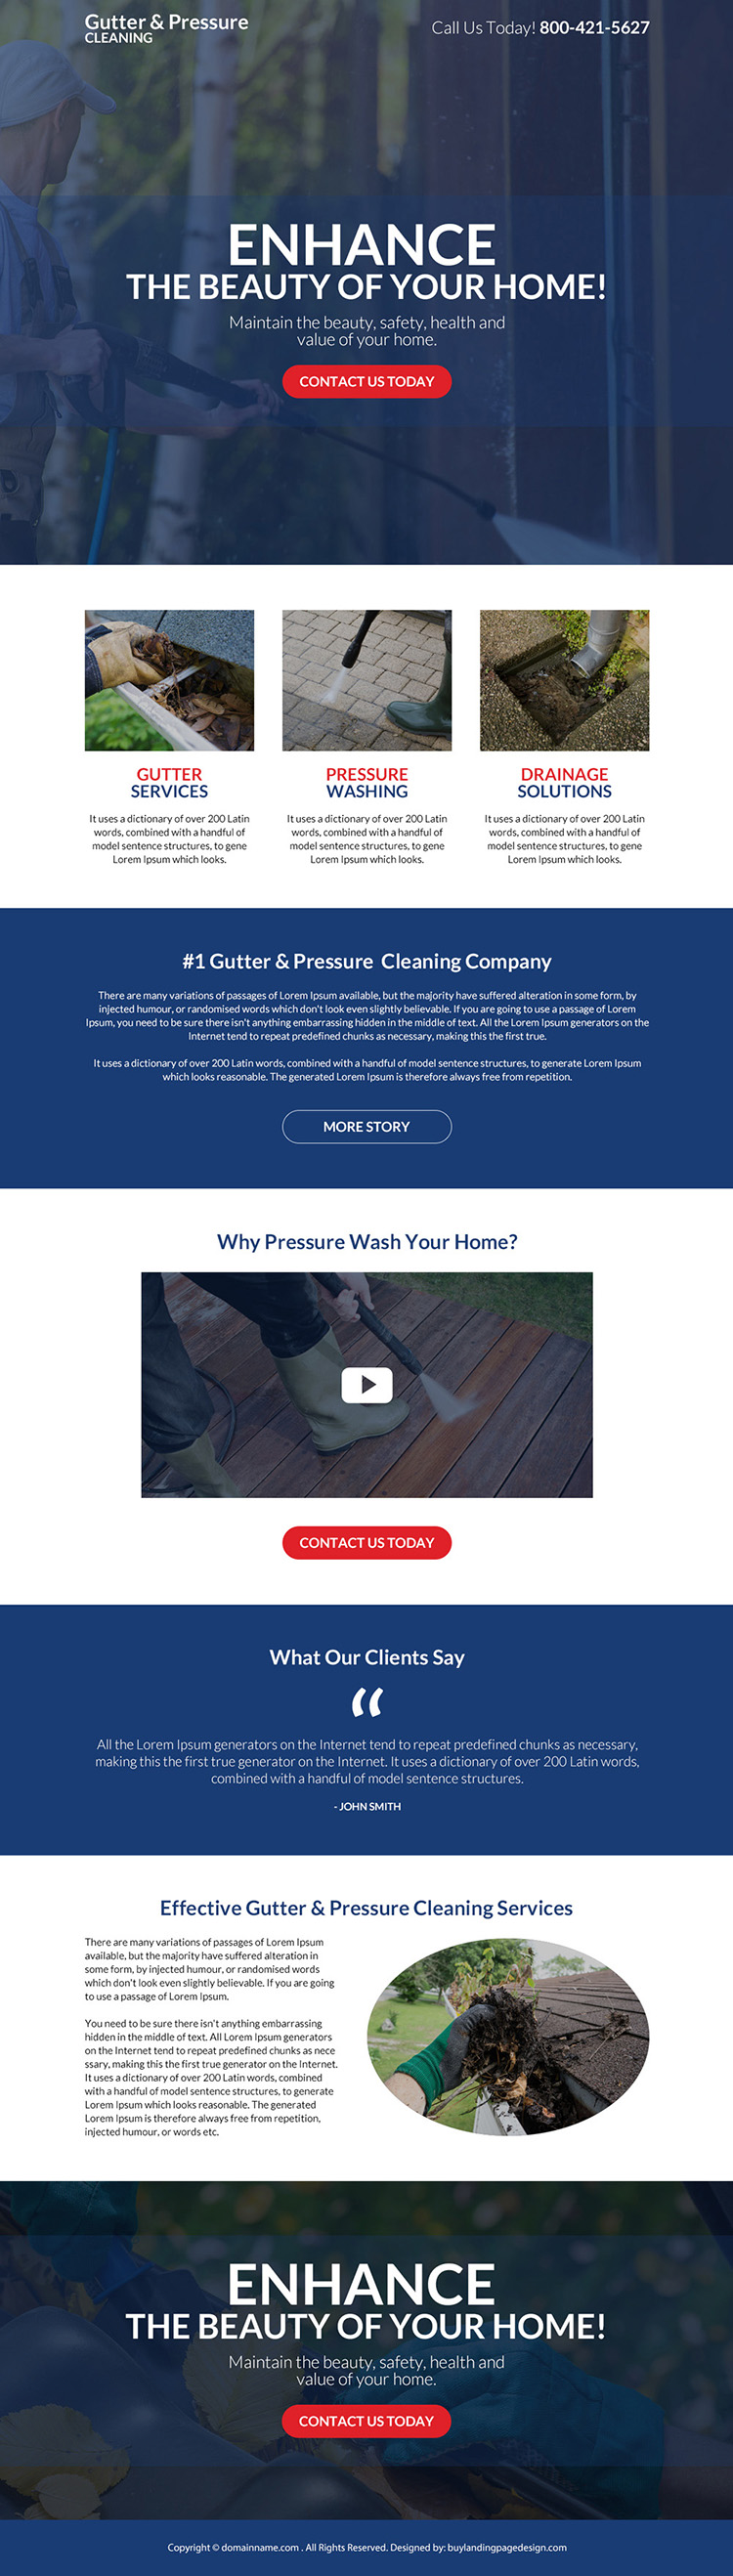 gutter and pressure cleaning company responsive landing page